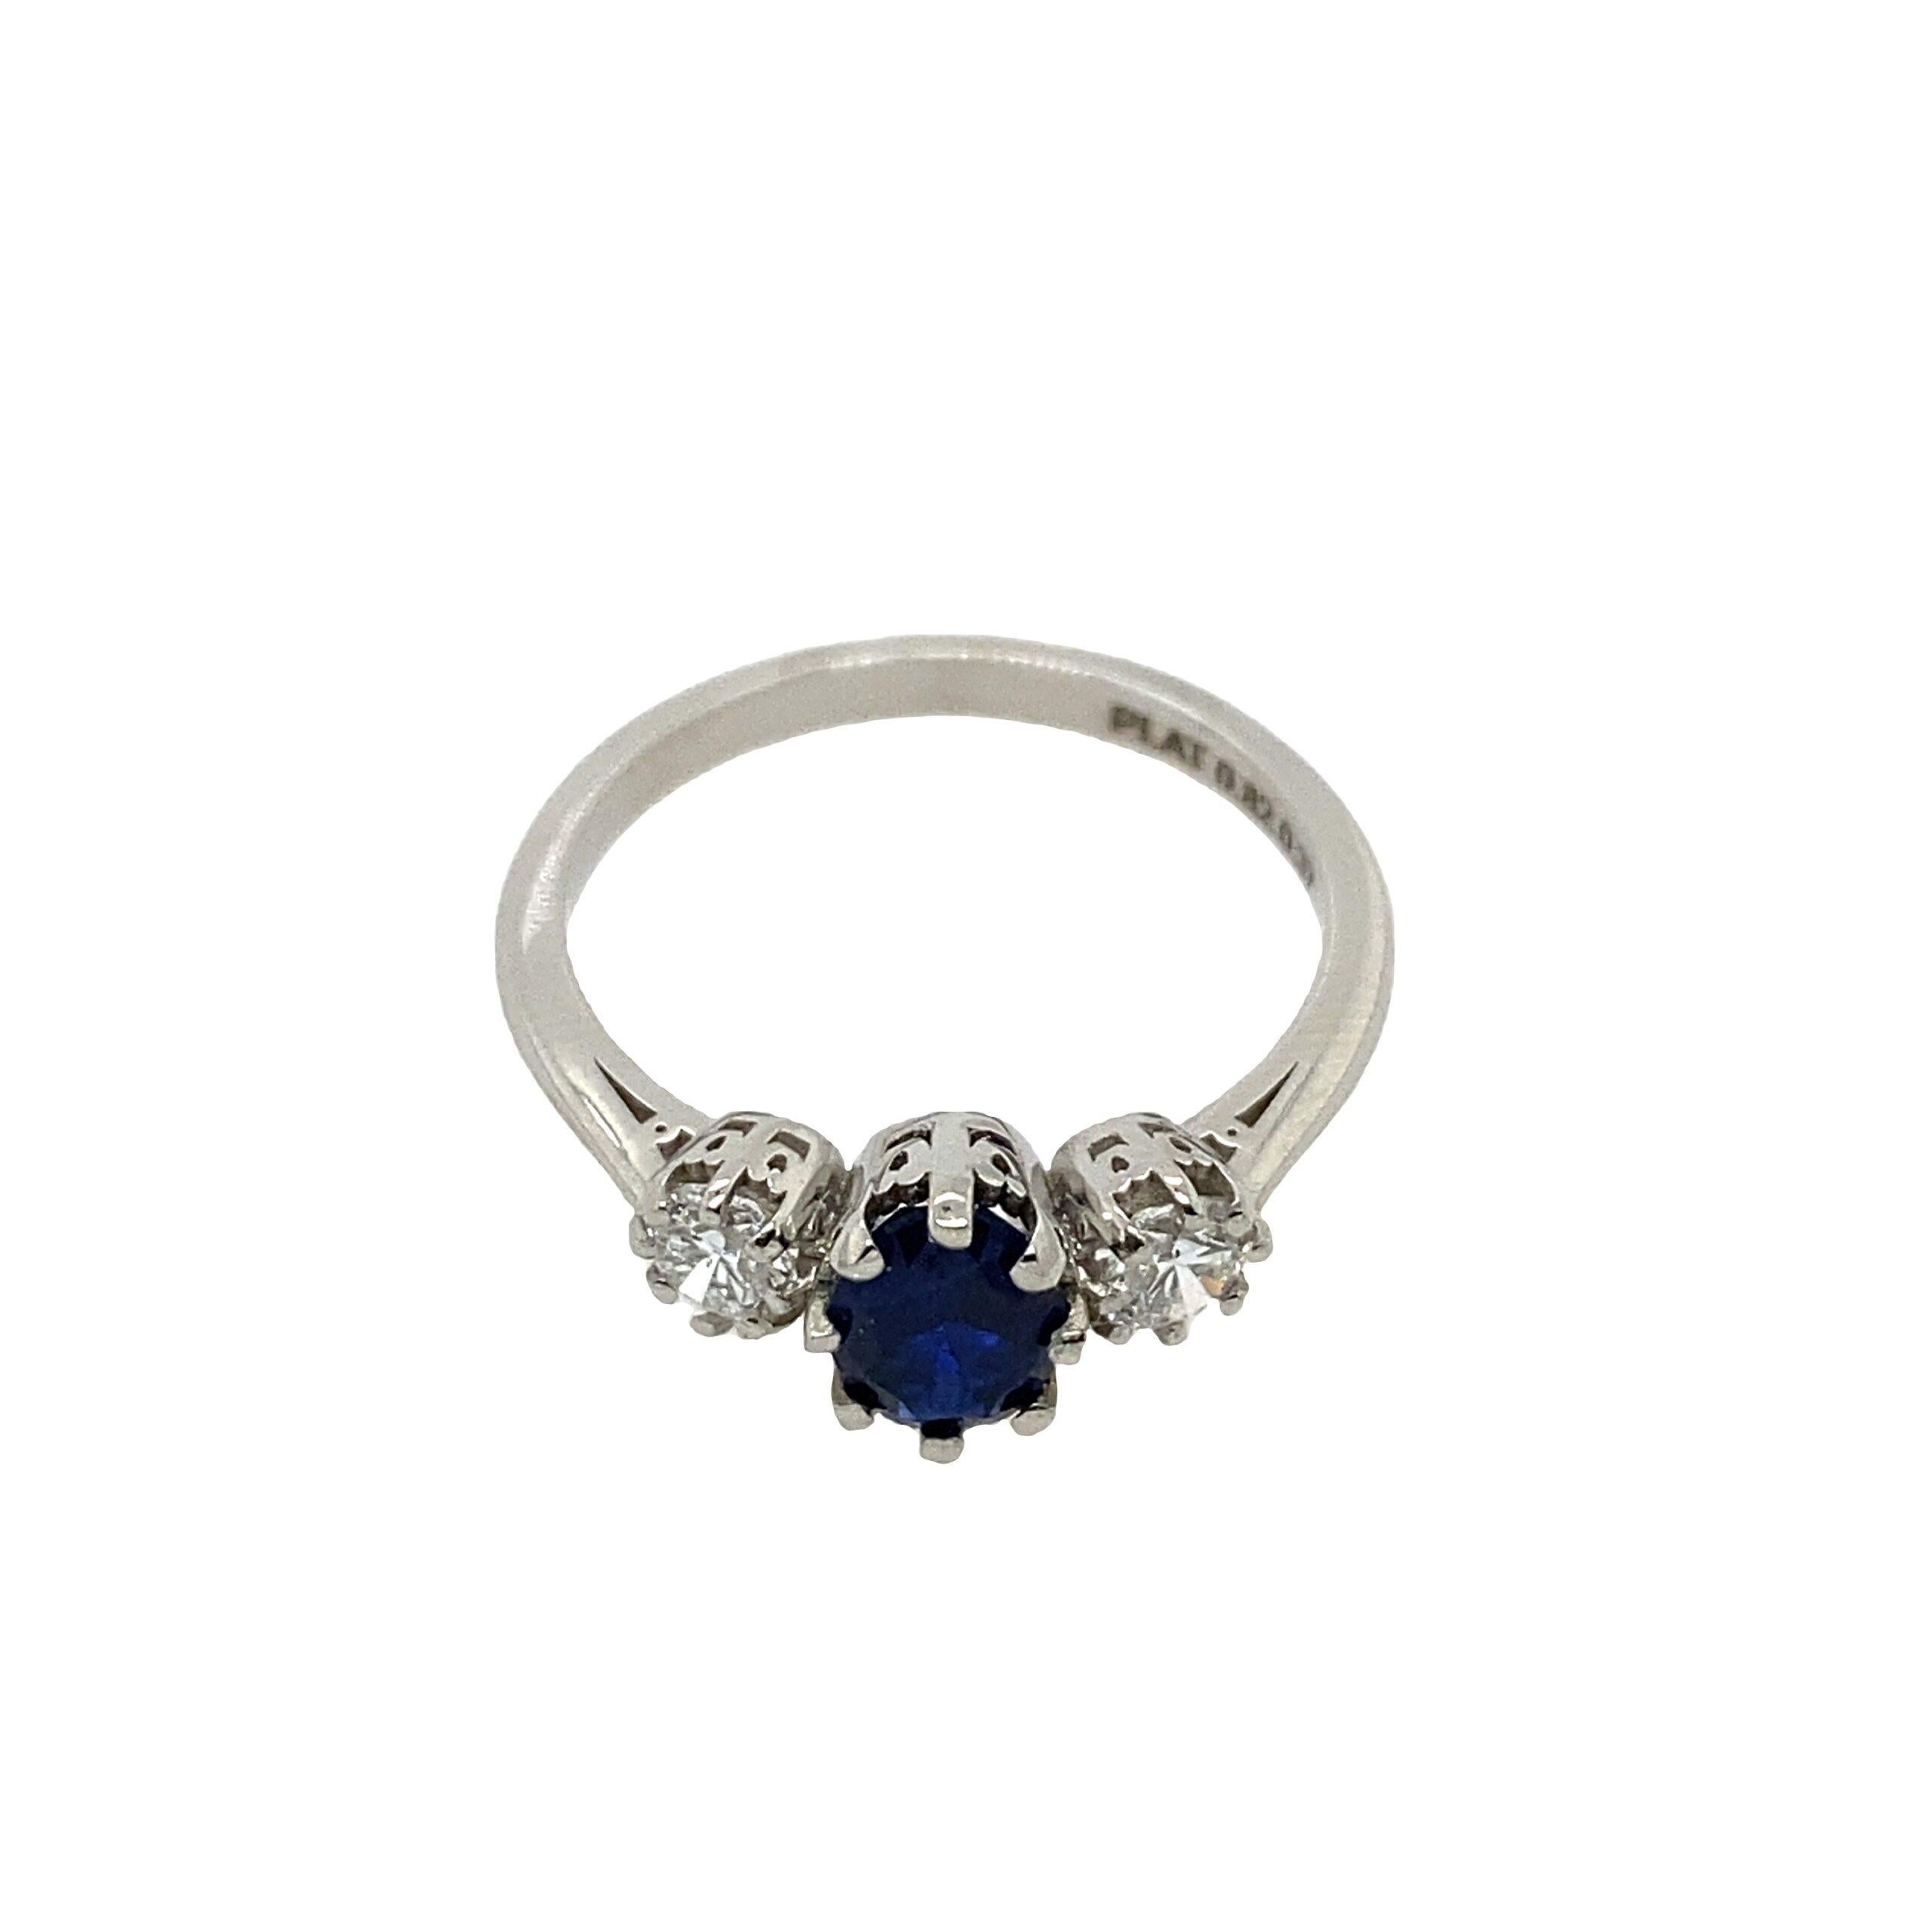 Platinum 3 Stone Very Finest Blue 0.81ct Sapphire Ring with 0.37ct of Diamonds

Additional Information:
Sapphire Weight: 0.81ct
Total Diamond Weight: 0.37ct
Diamond Colour: G
Diamond Clarity: VS
Total Weight: 3.7g
Ring Size: M 1/2